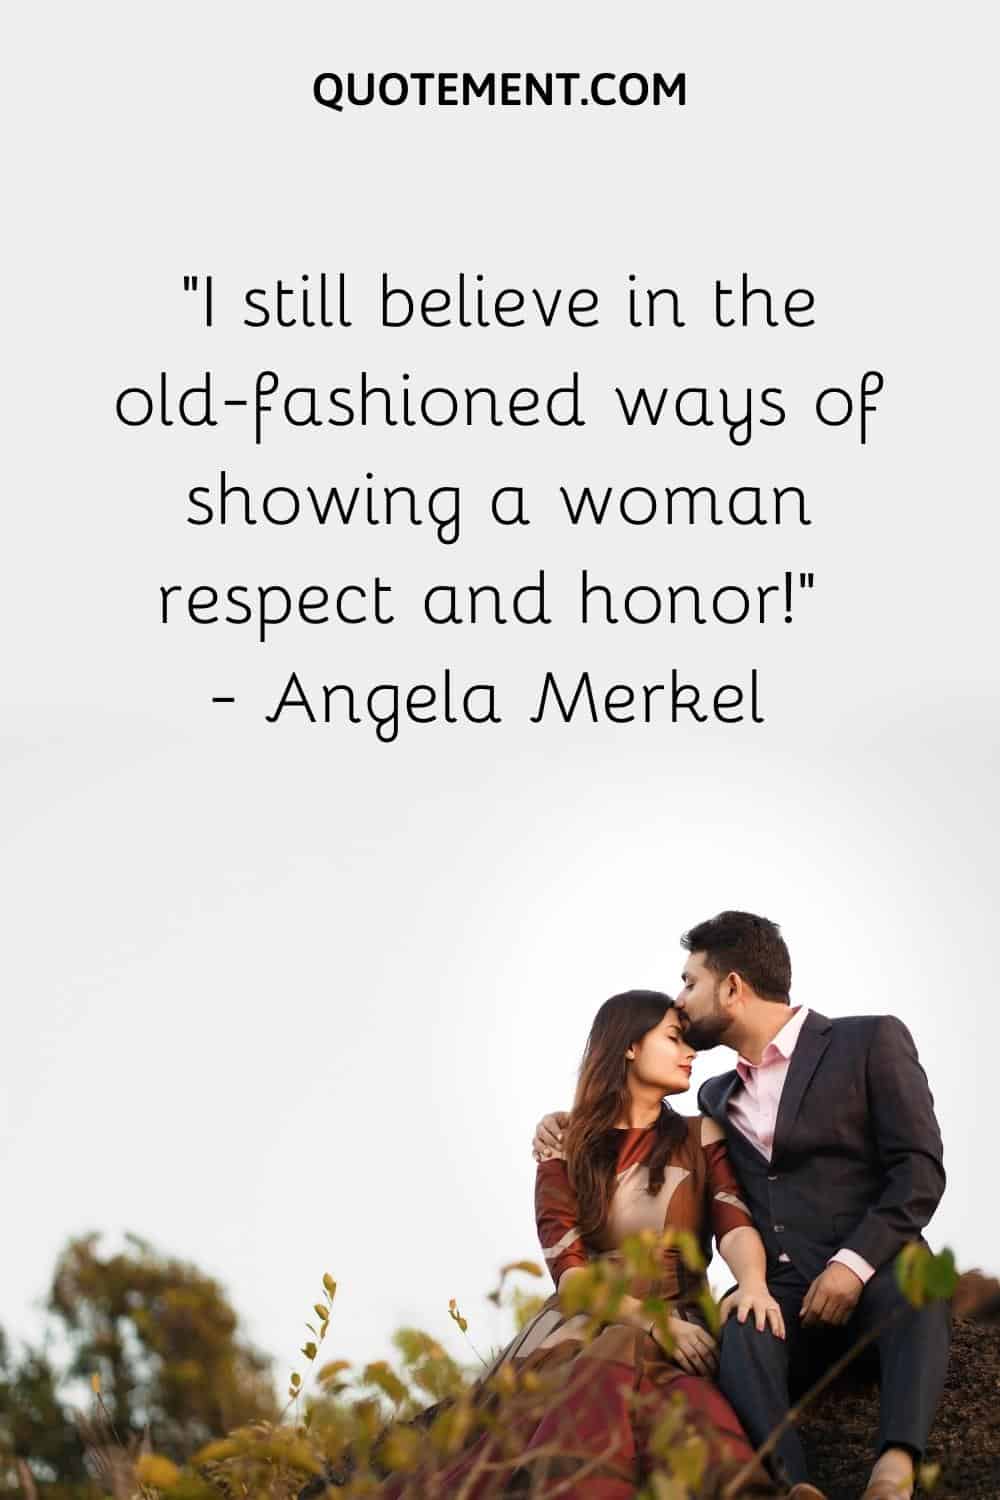 I still believe in the old-fashioned ways of showing a woman respect and honor